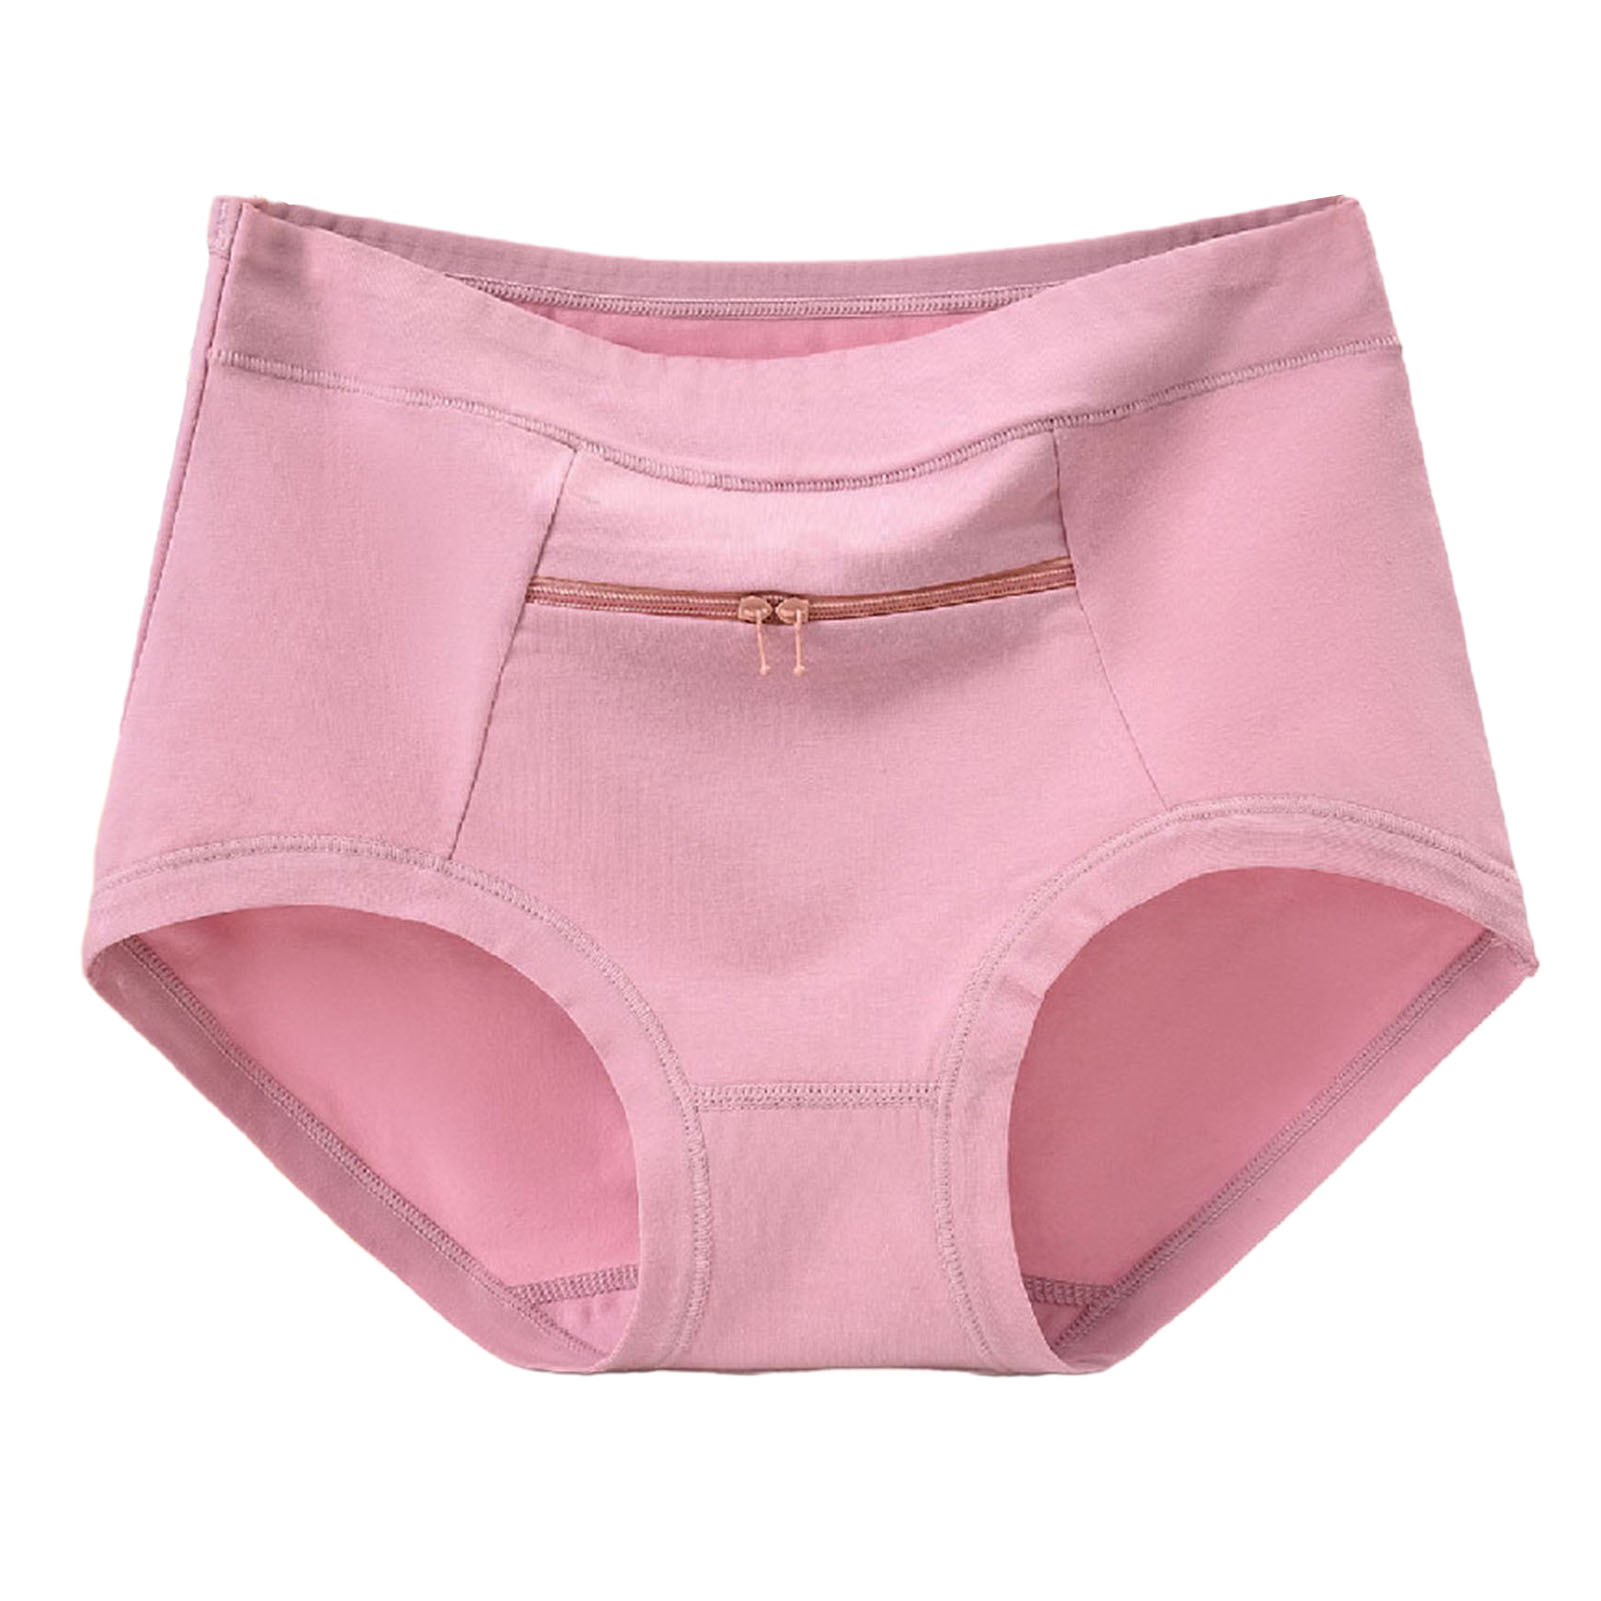 Women Panties with Zipper Big Size Female Cotton Underwear with